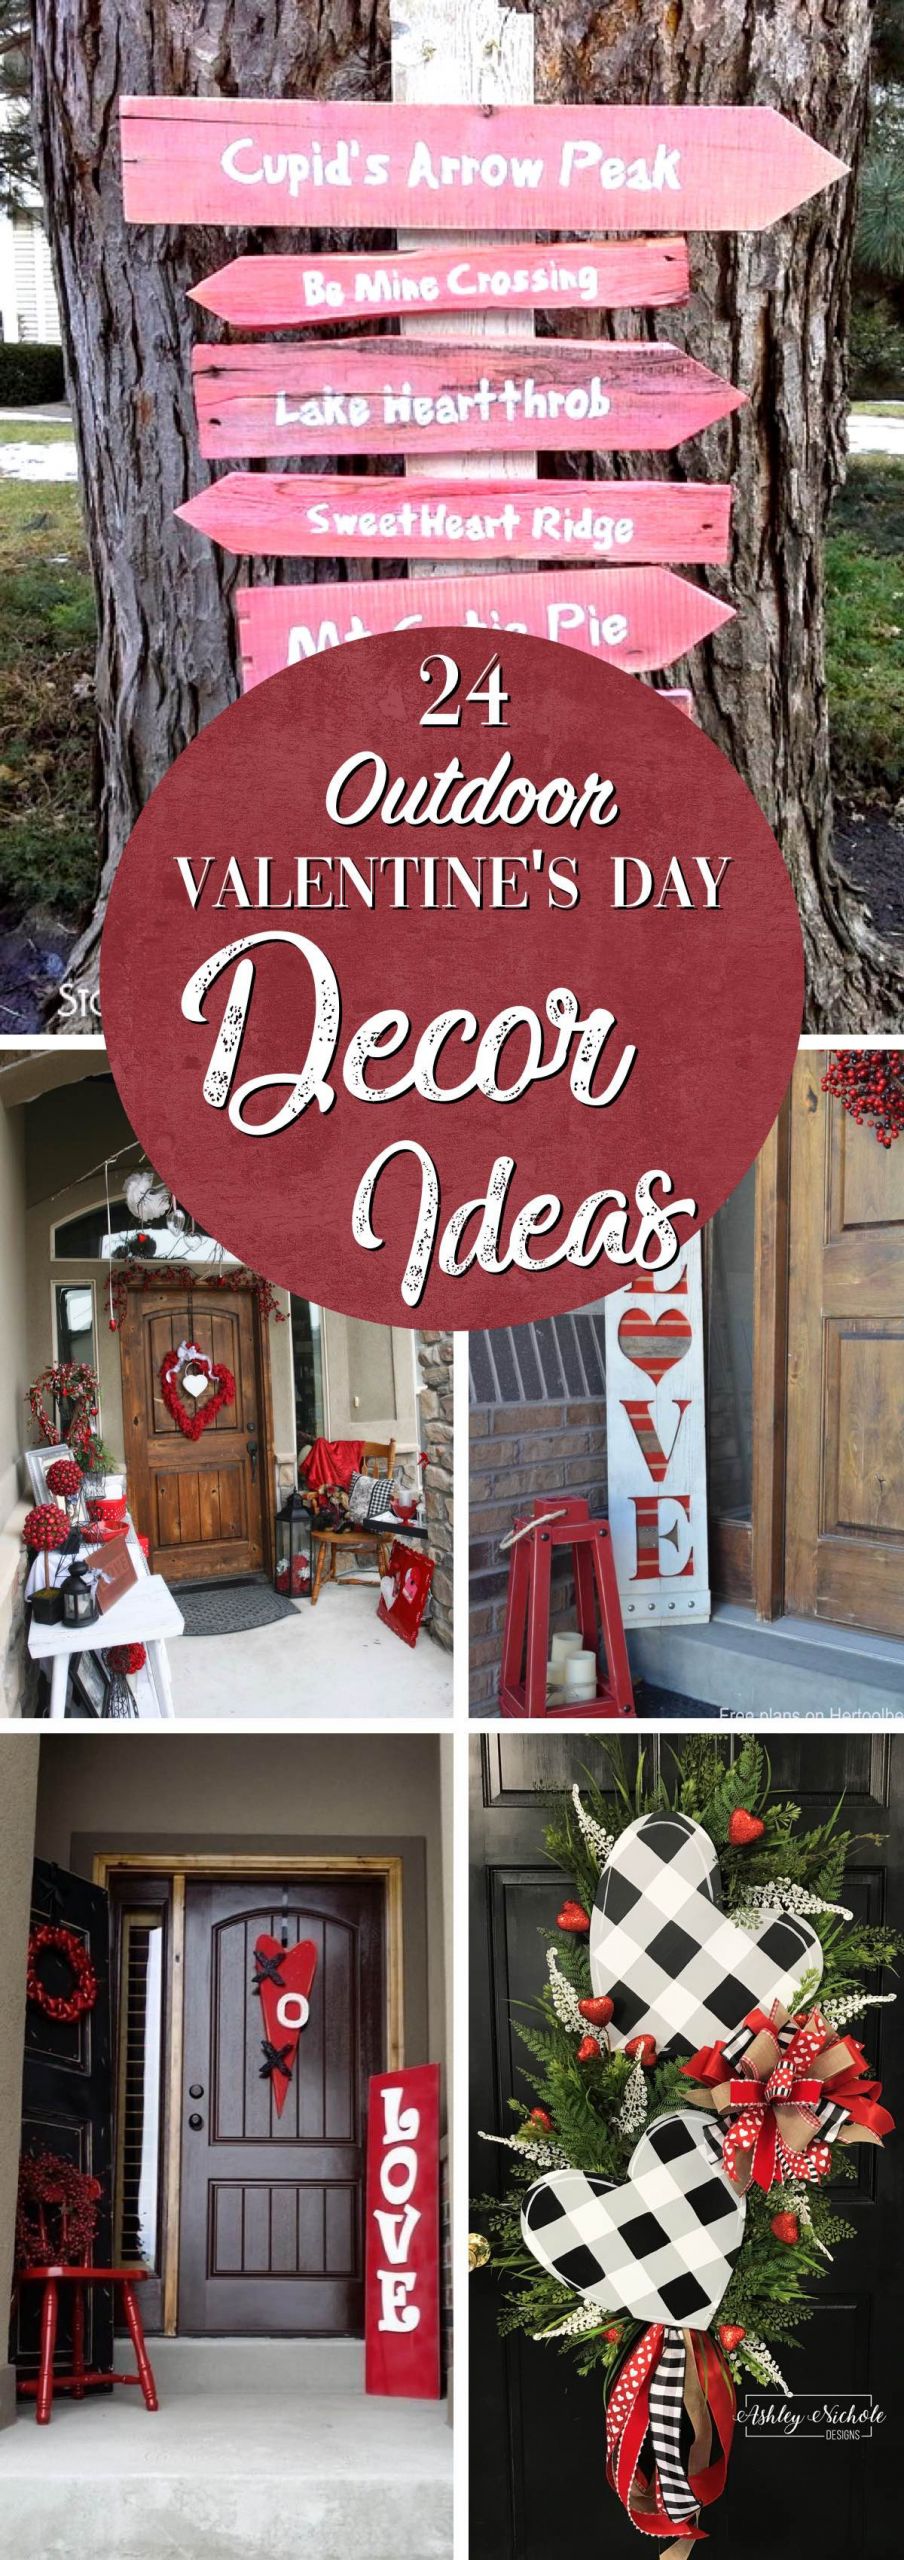 Ideas For Valentines Day 2019
 Best 24 Outdoor Valentine s Day Decor Ideas for 2019